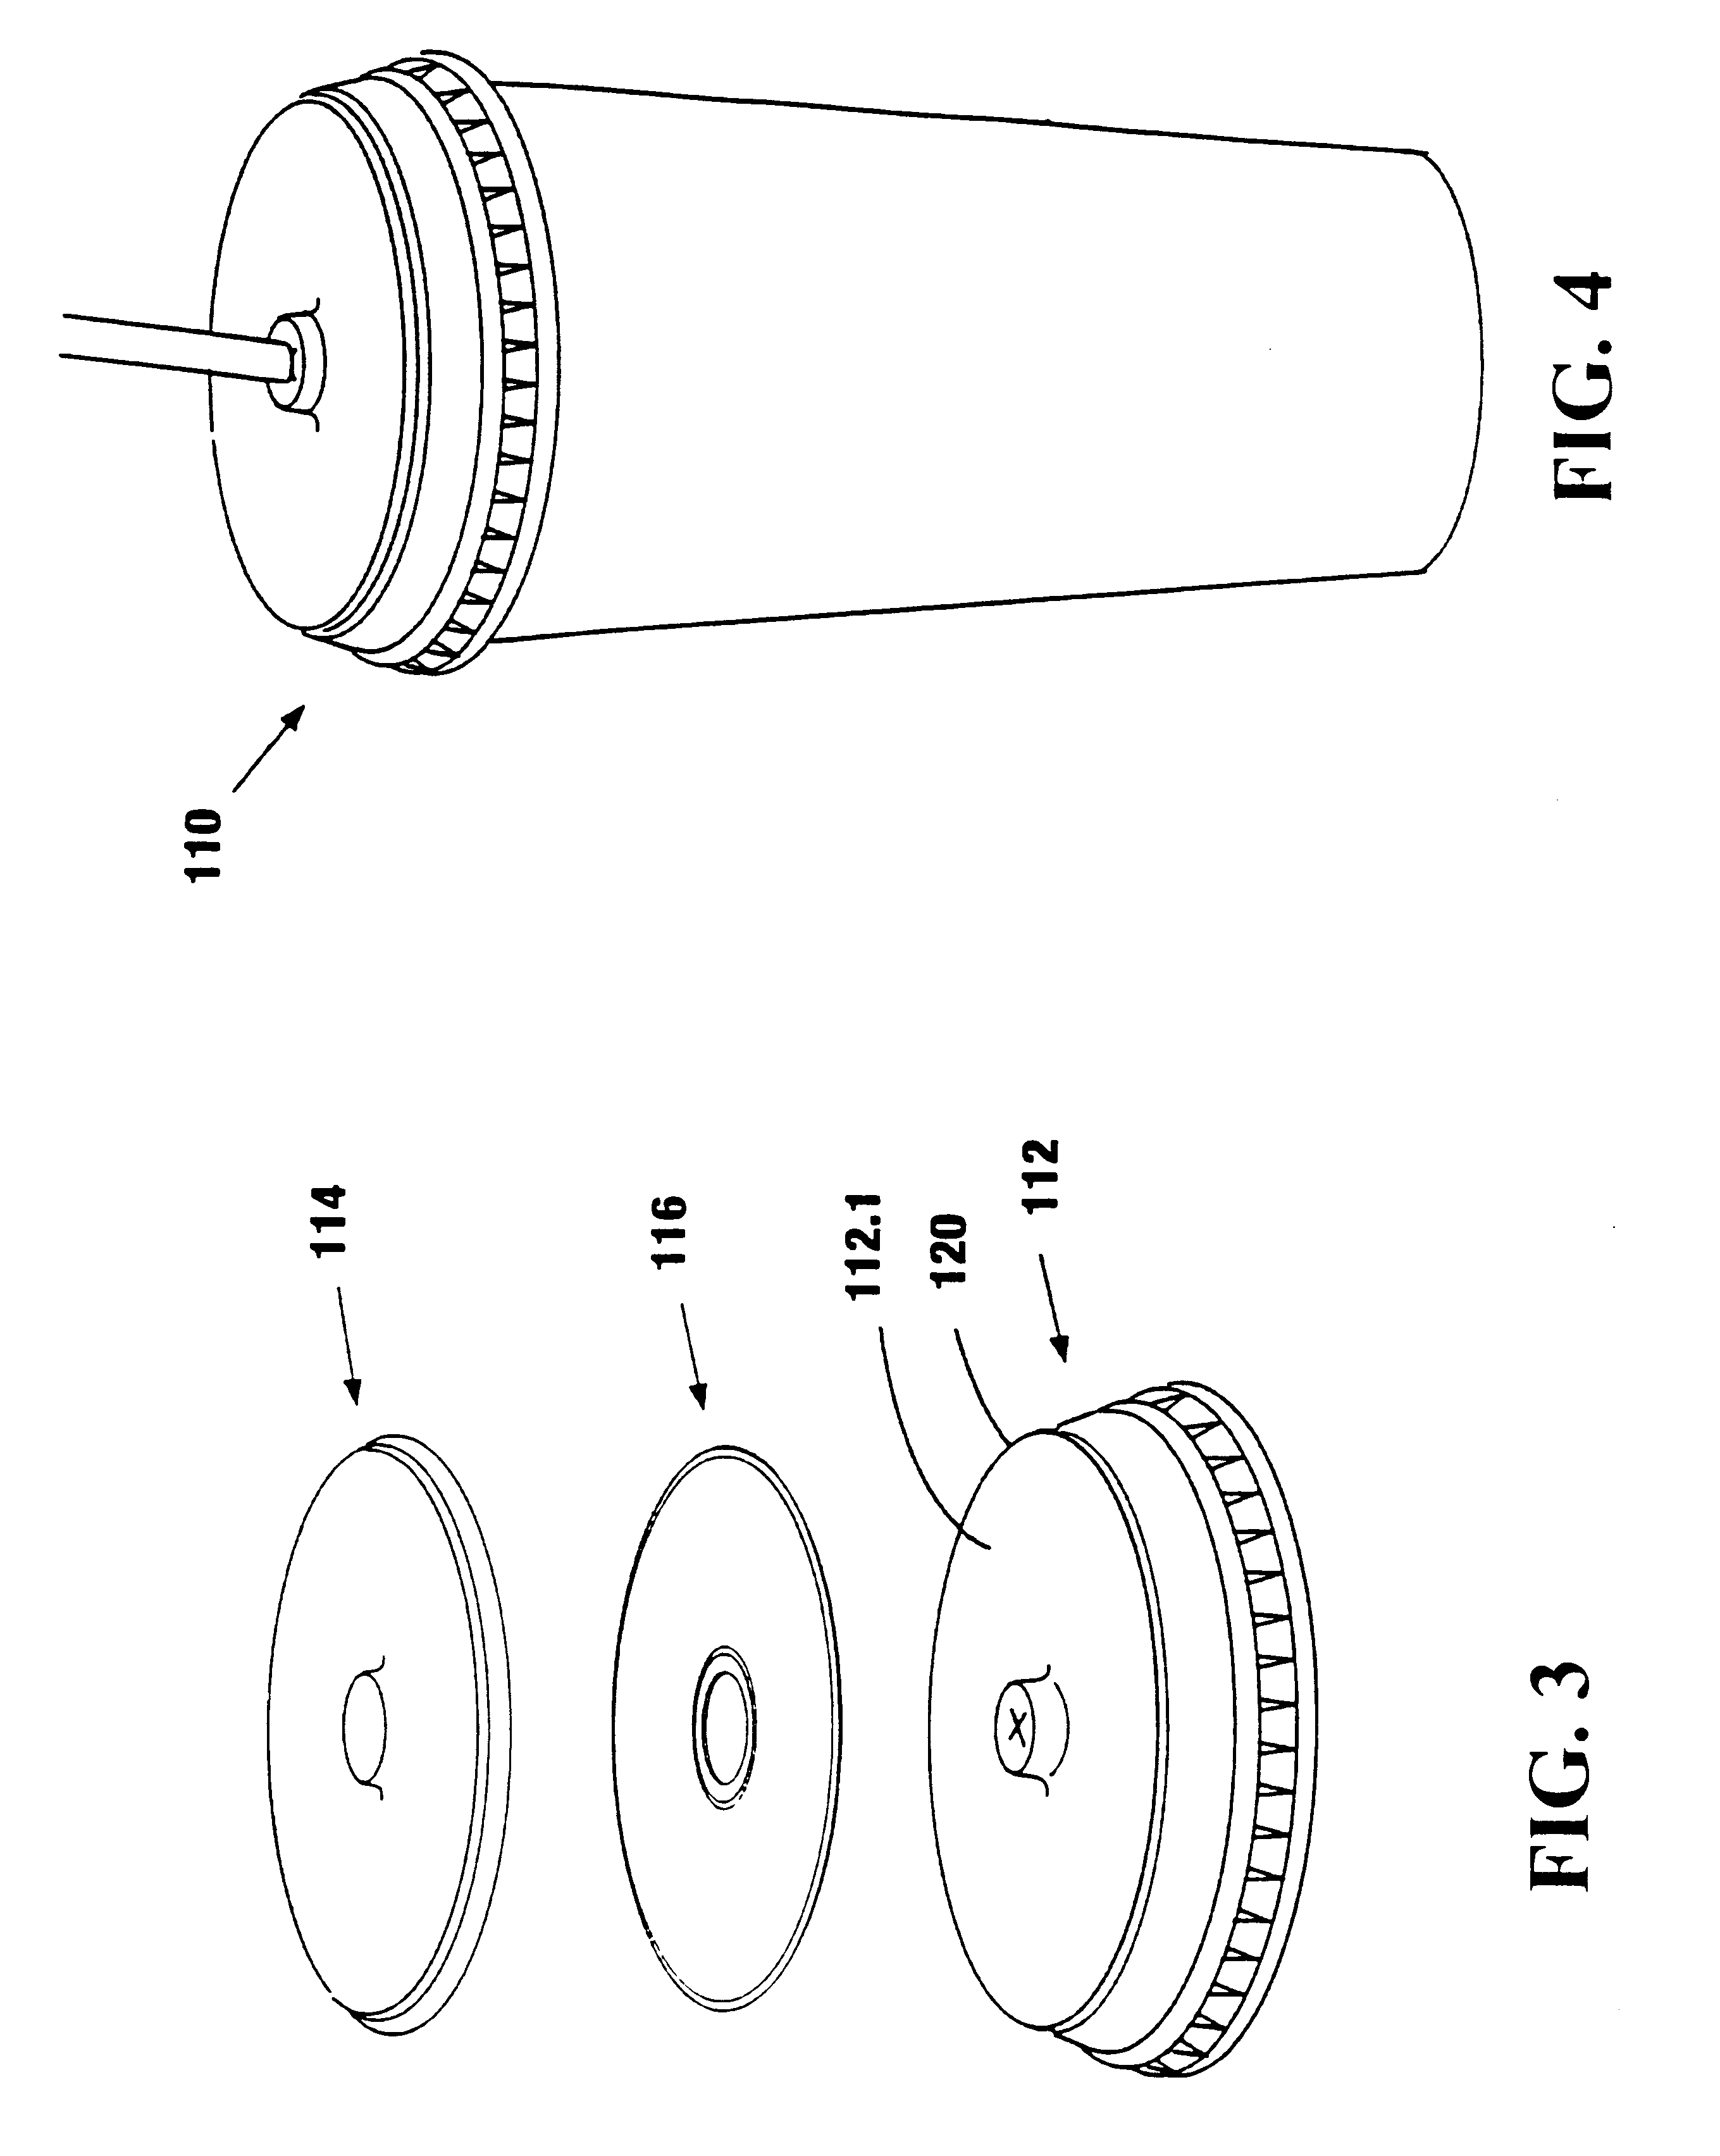 Combined merchandise container and display device